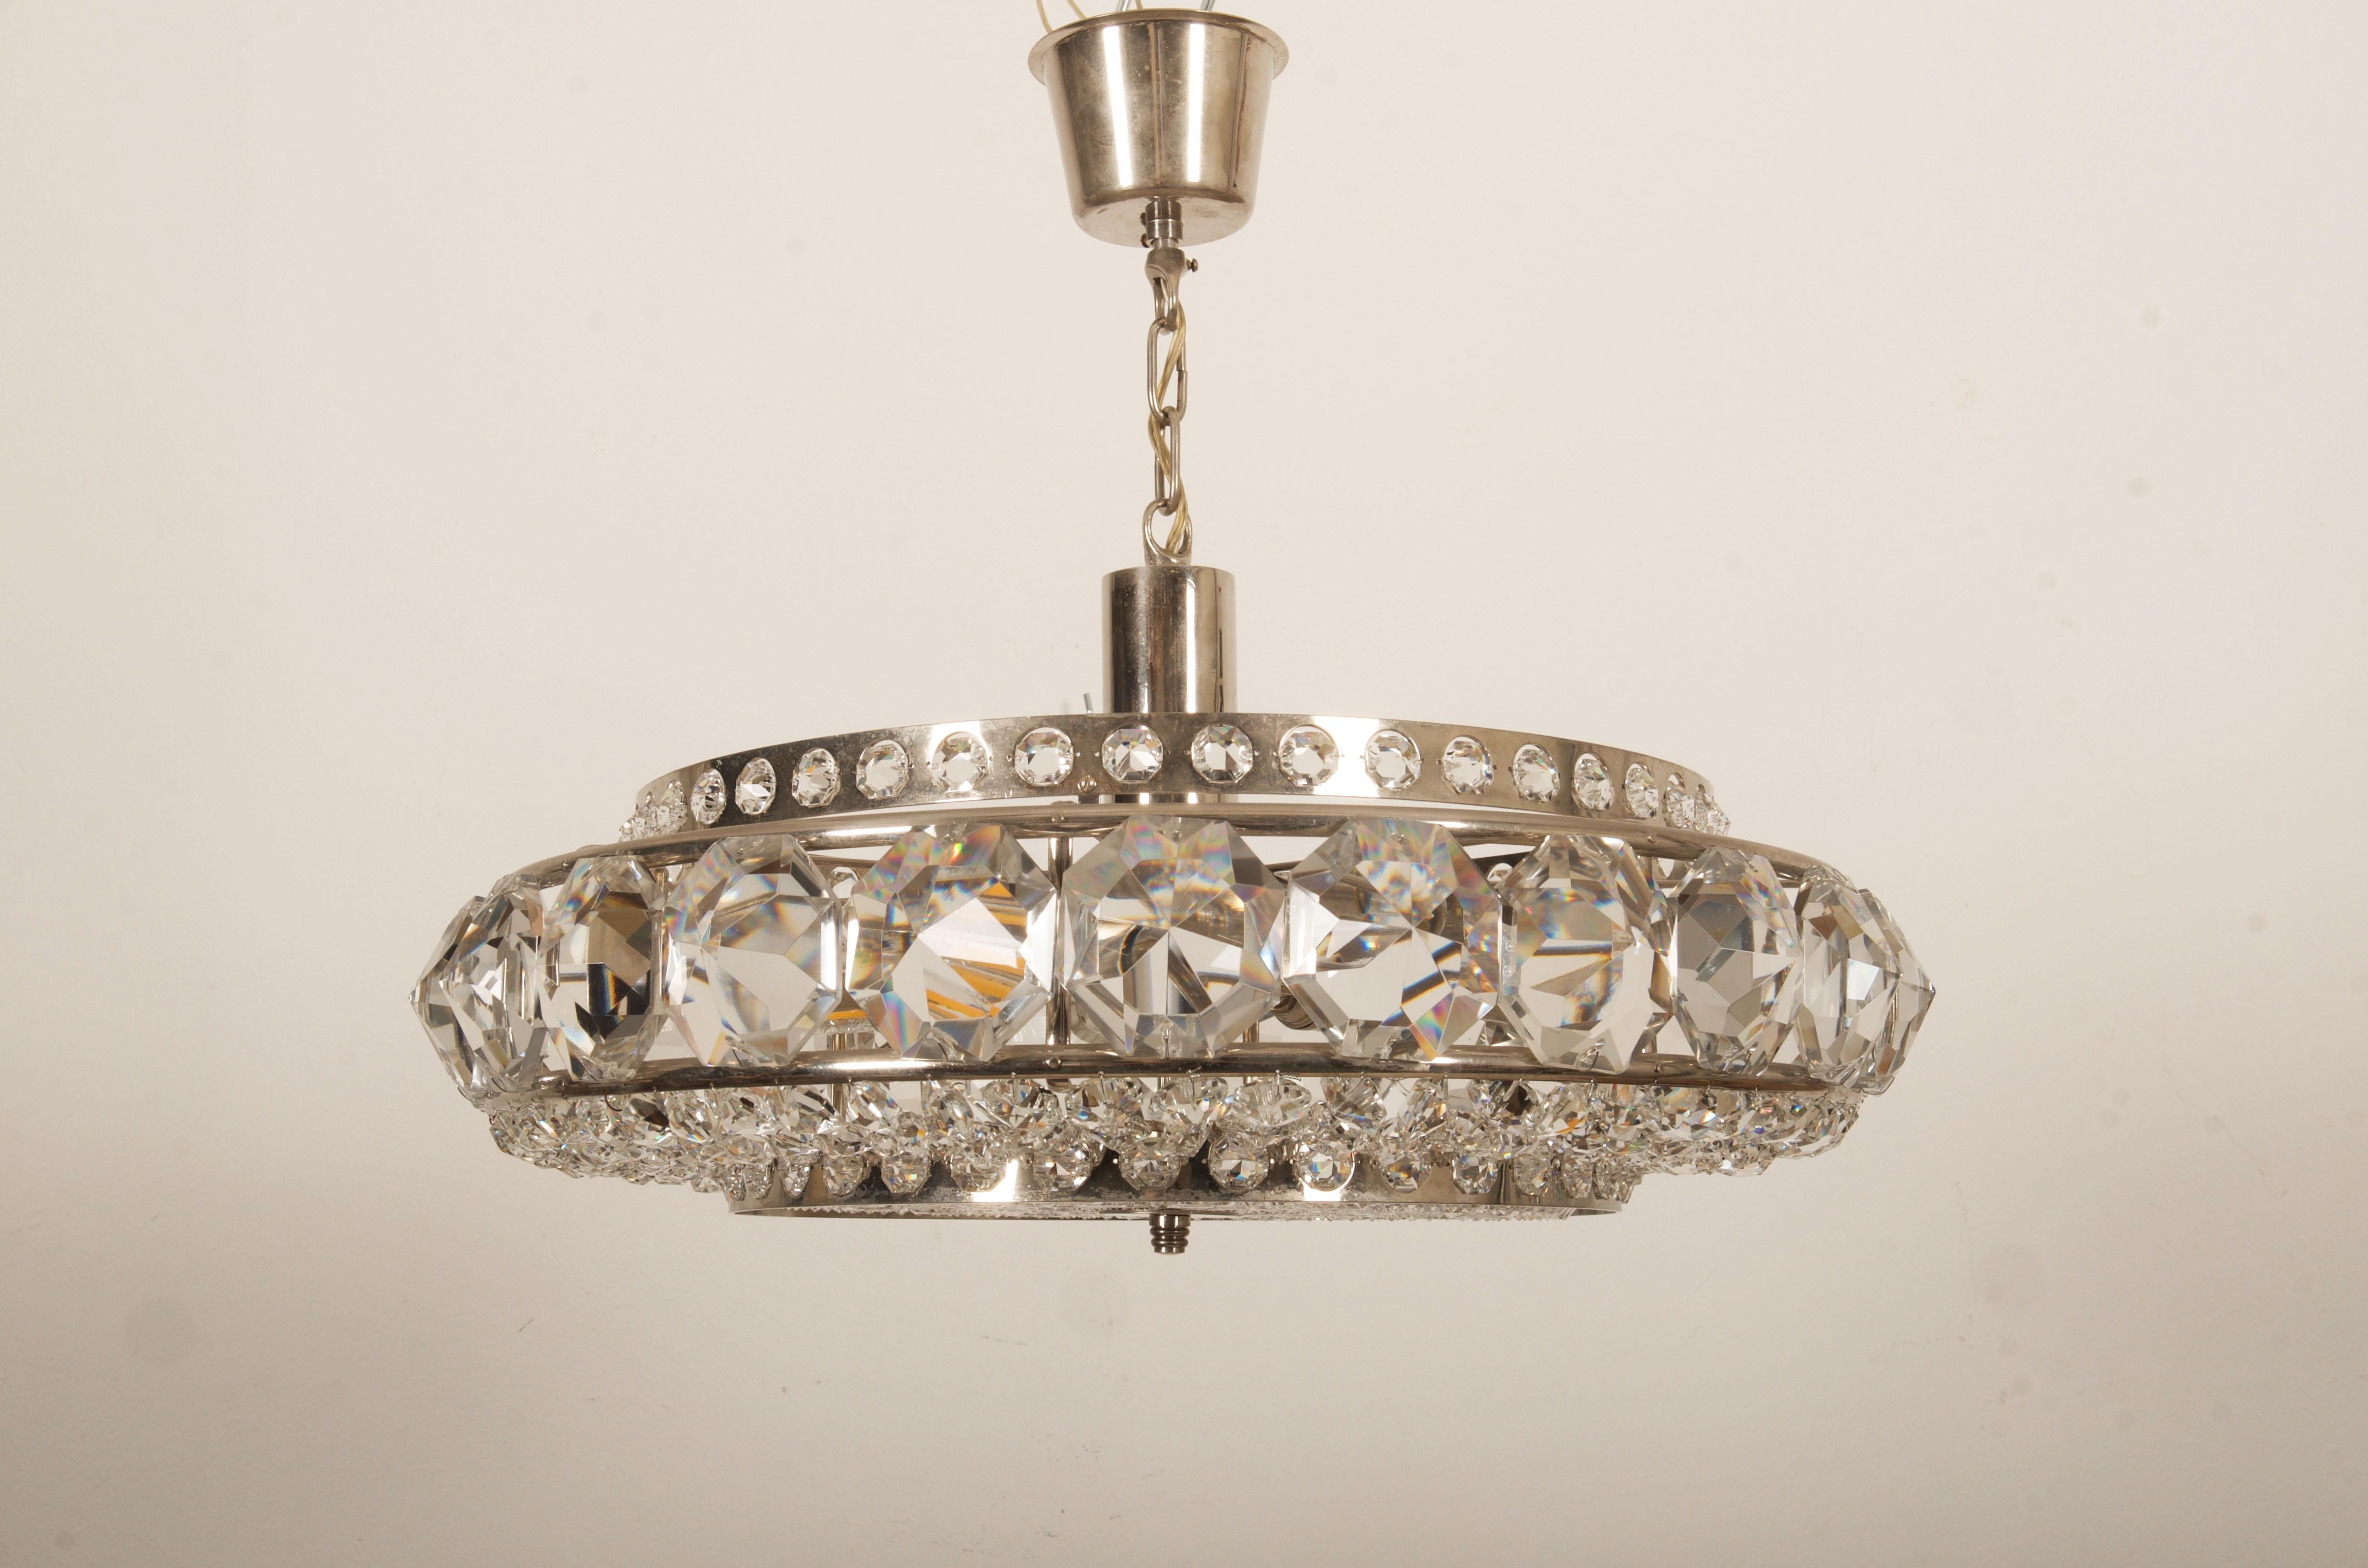 Mid-20th Century Chromed Brass and Glass Chandelier by Orrefors from the 1960s For Sale